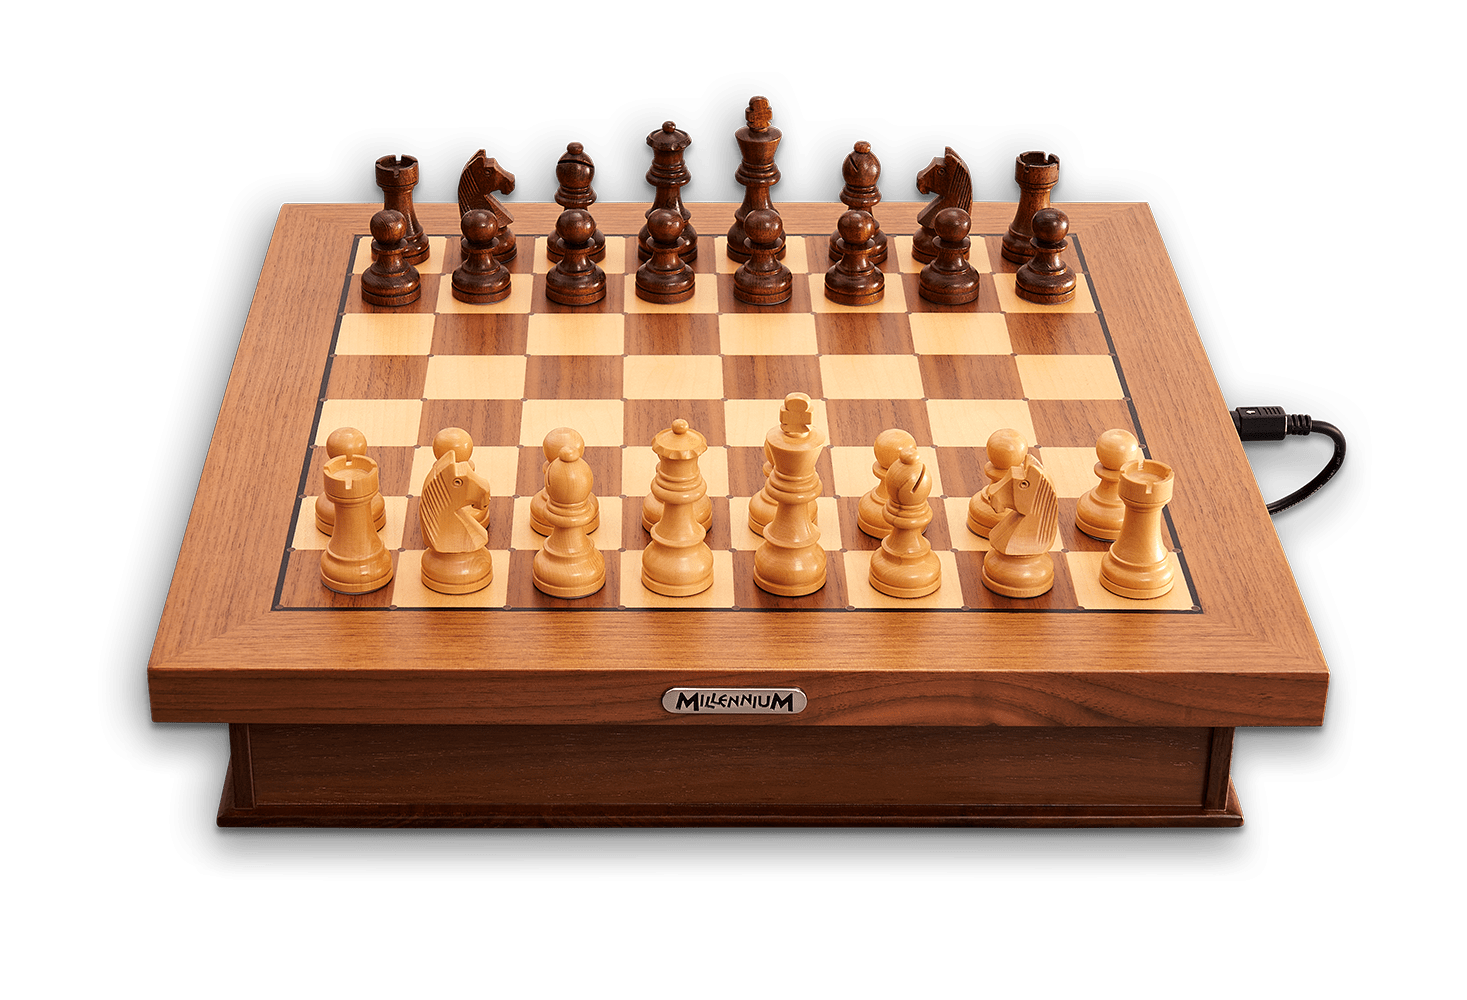 Play chess with others worldwide with electronic chess board – Chess House